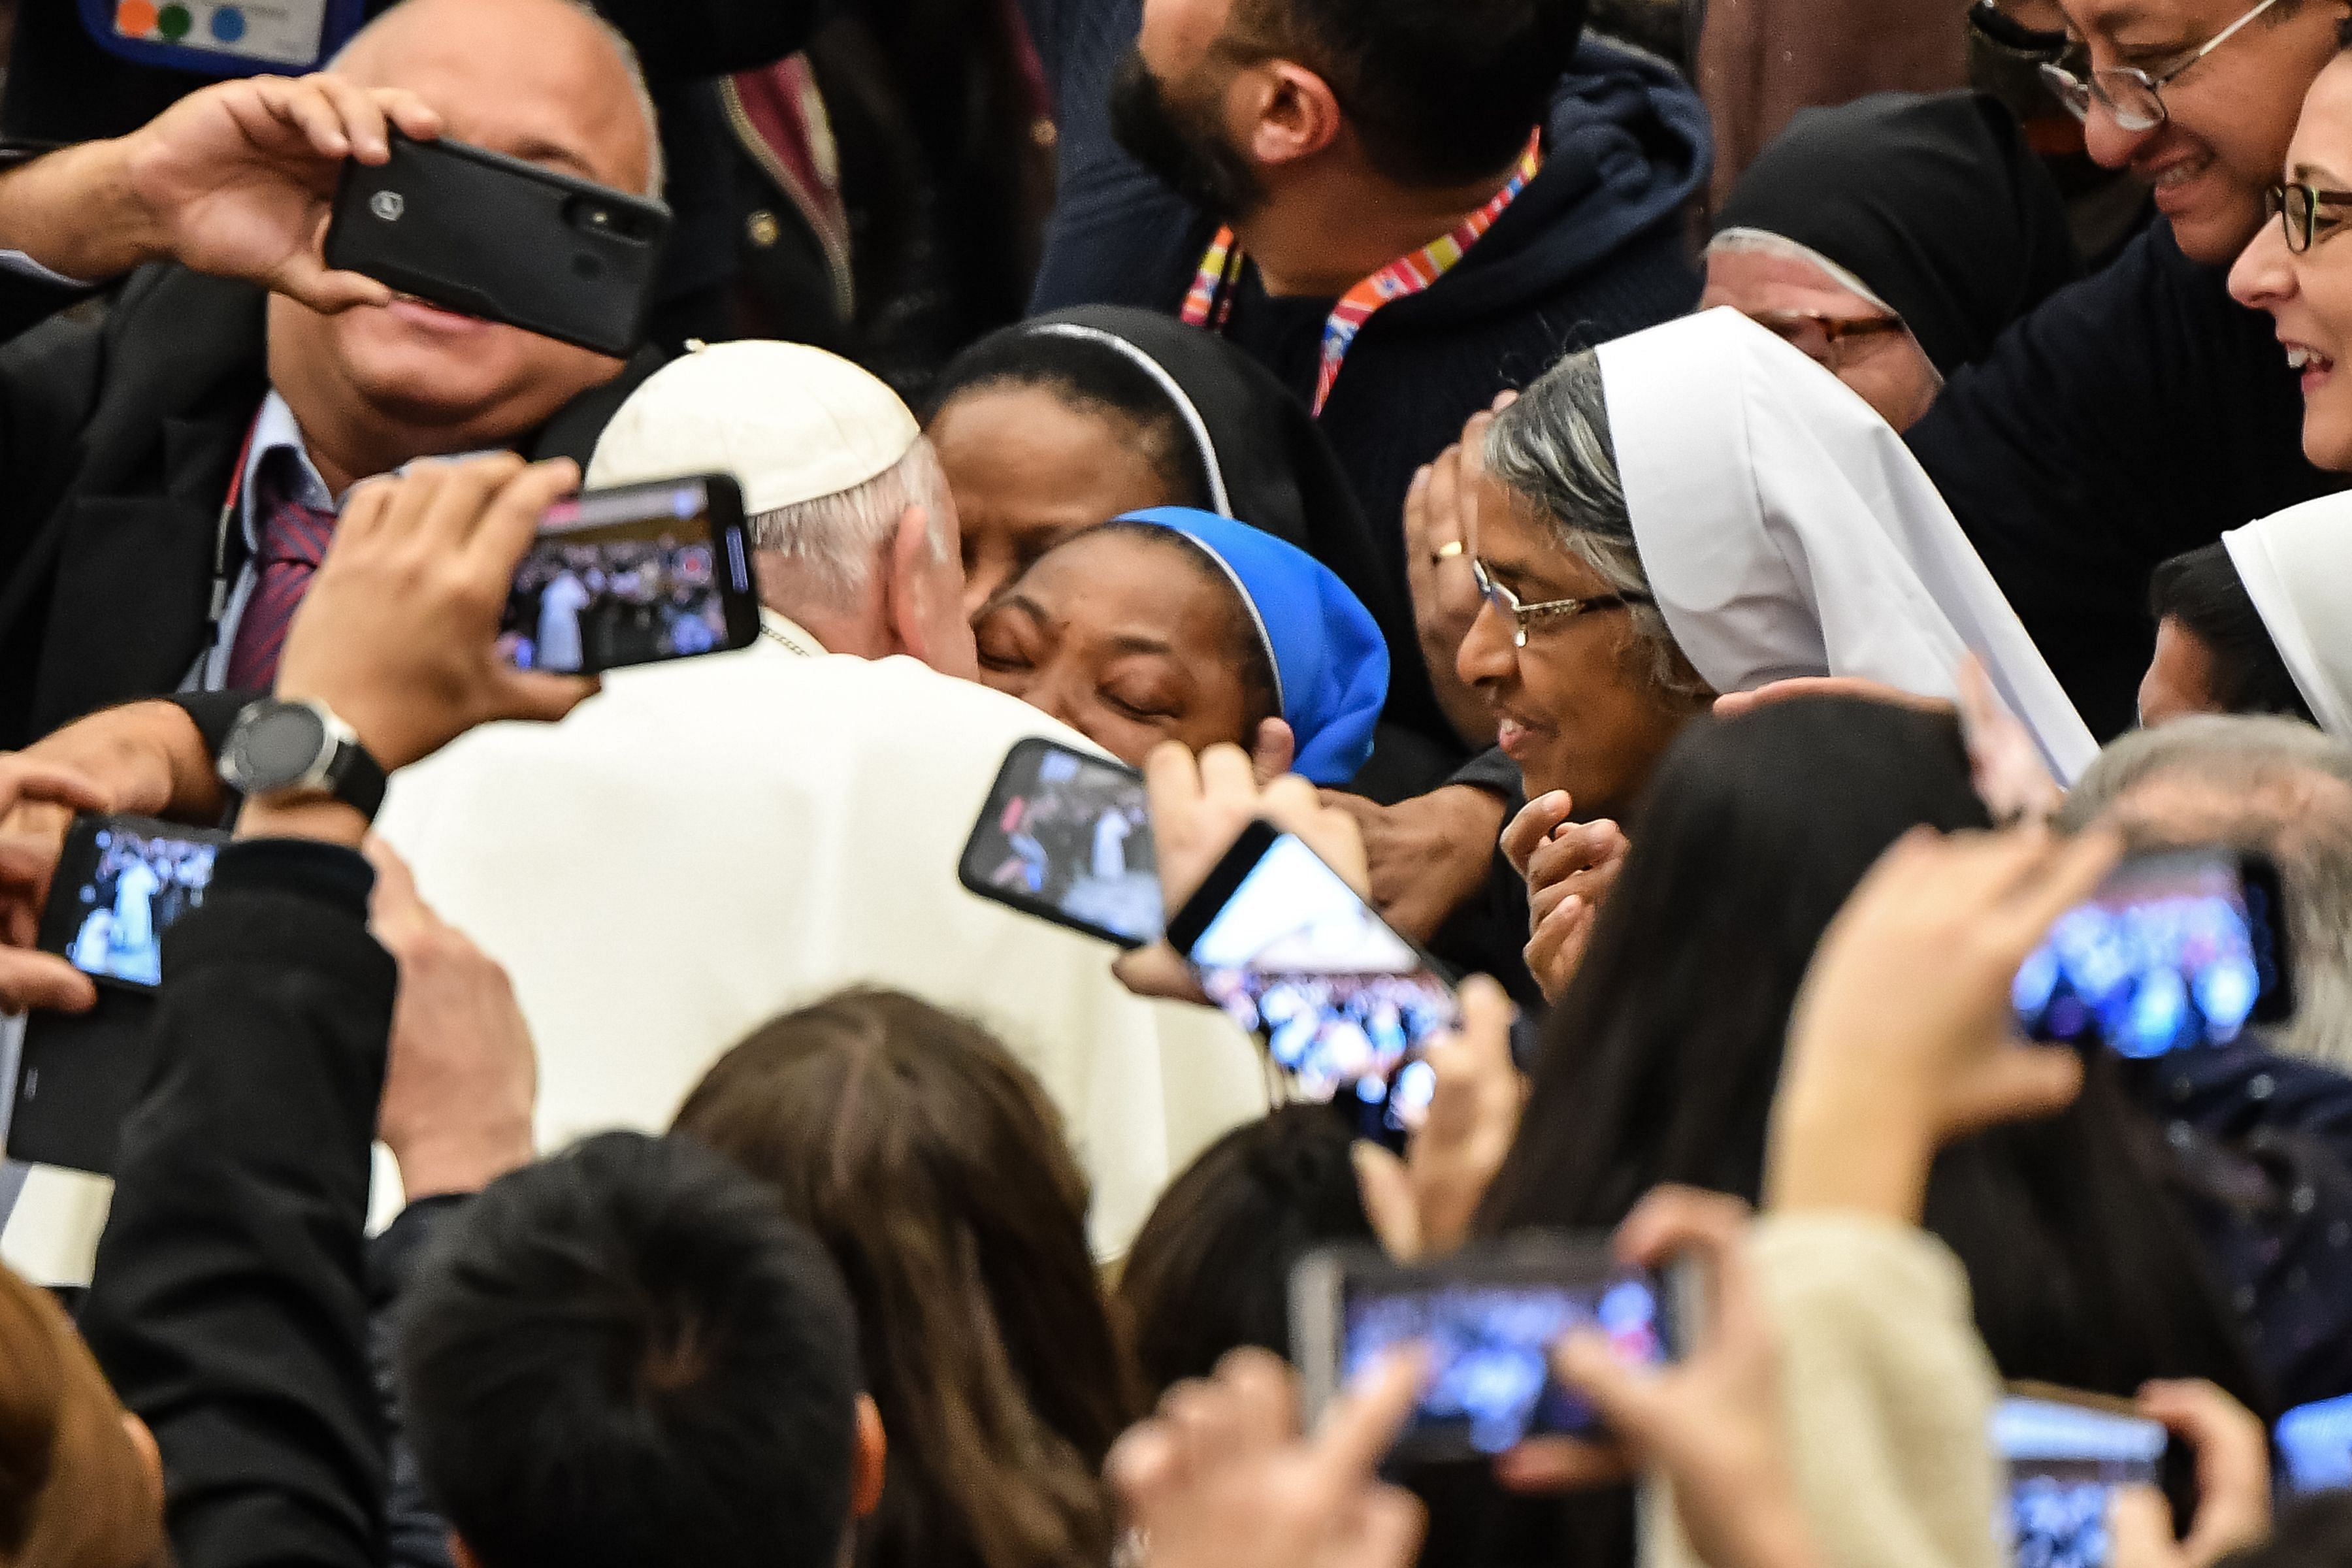 Pope Francis kisses a nun who had been shouting "Long live the pope!" as he arrives for the weekly general audience on January 8, 2020 at Paul-VI hall in the Vatican. (AFP Photo)